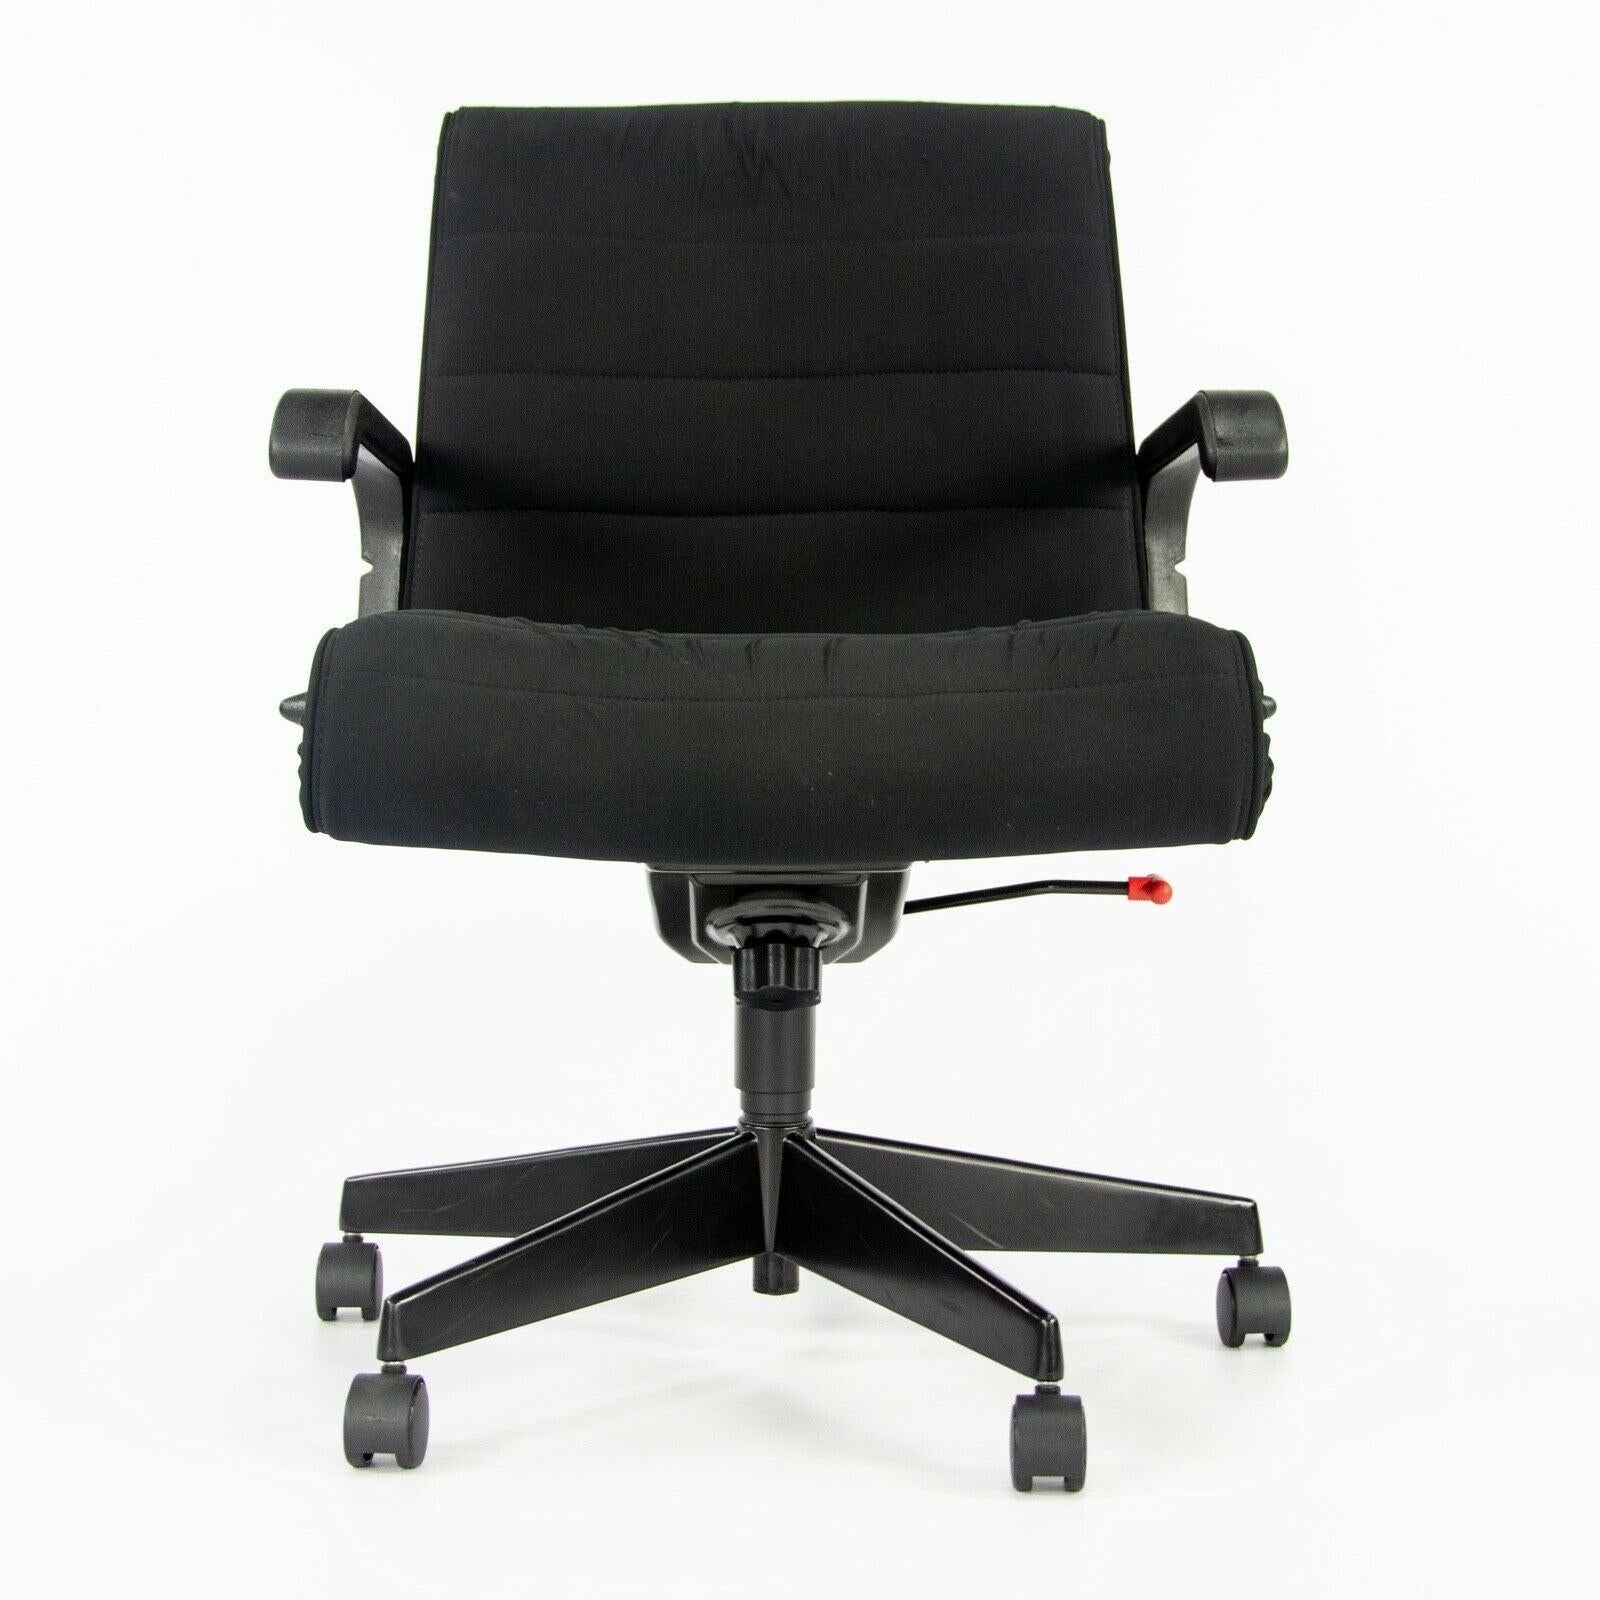 1990s Richard Sapper for Knoll Office / Desk Chair with Black Fabric and Frame For Sale 3